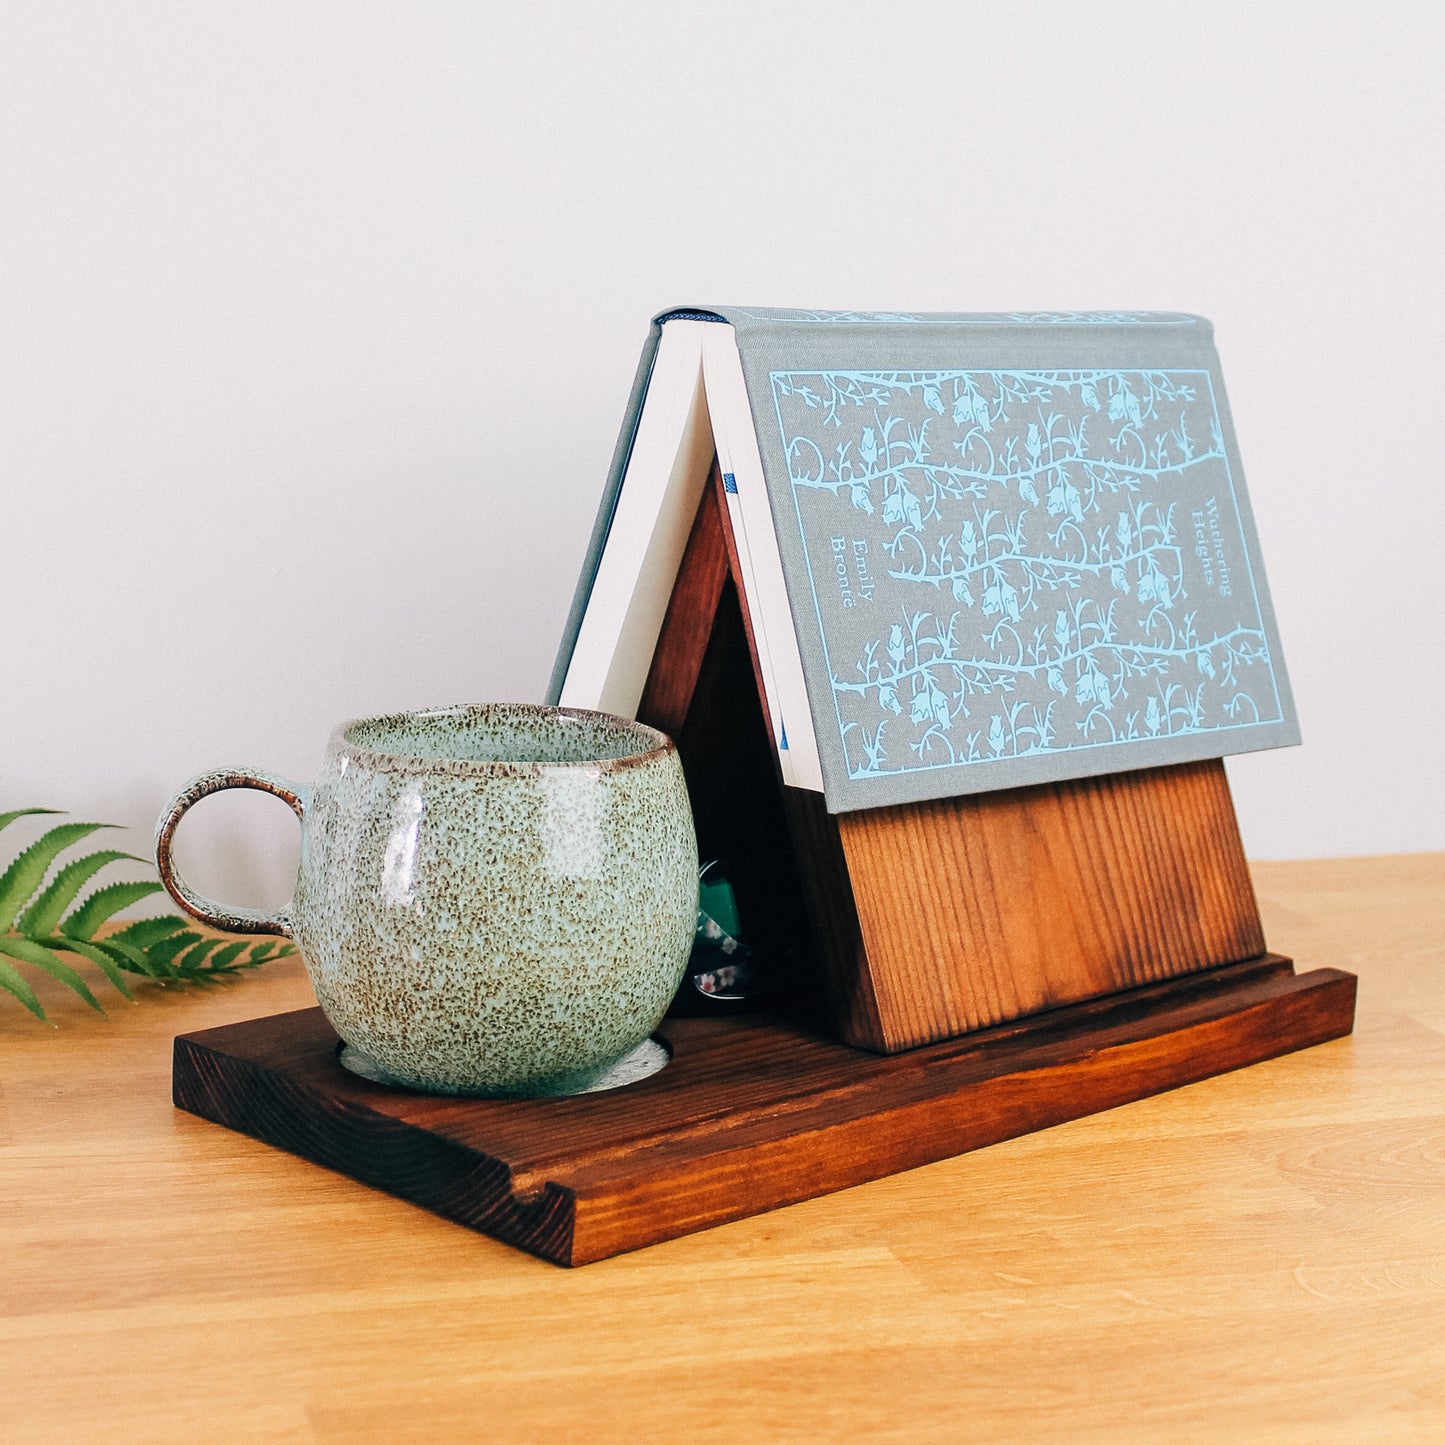 The perfect companion for your next reading session: a dark wooden book valet and a steaming cup of tea.